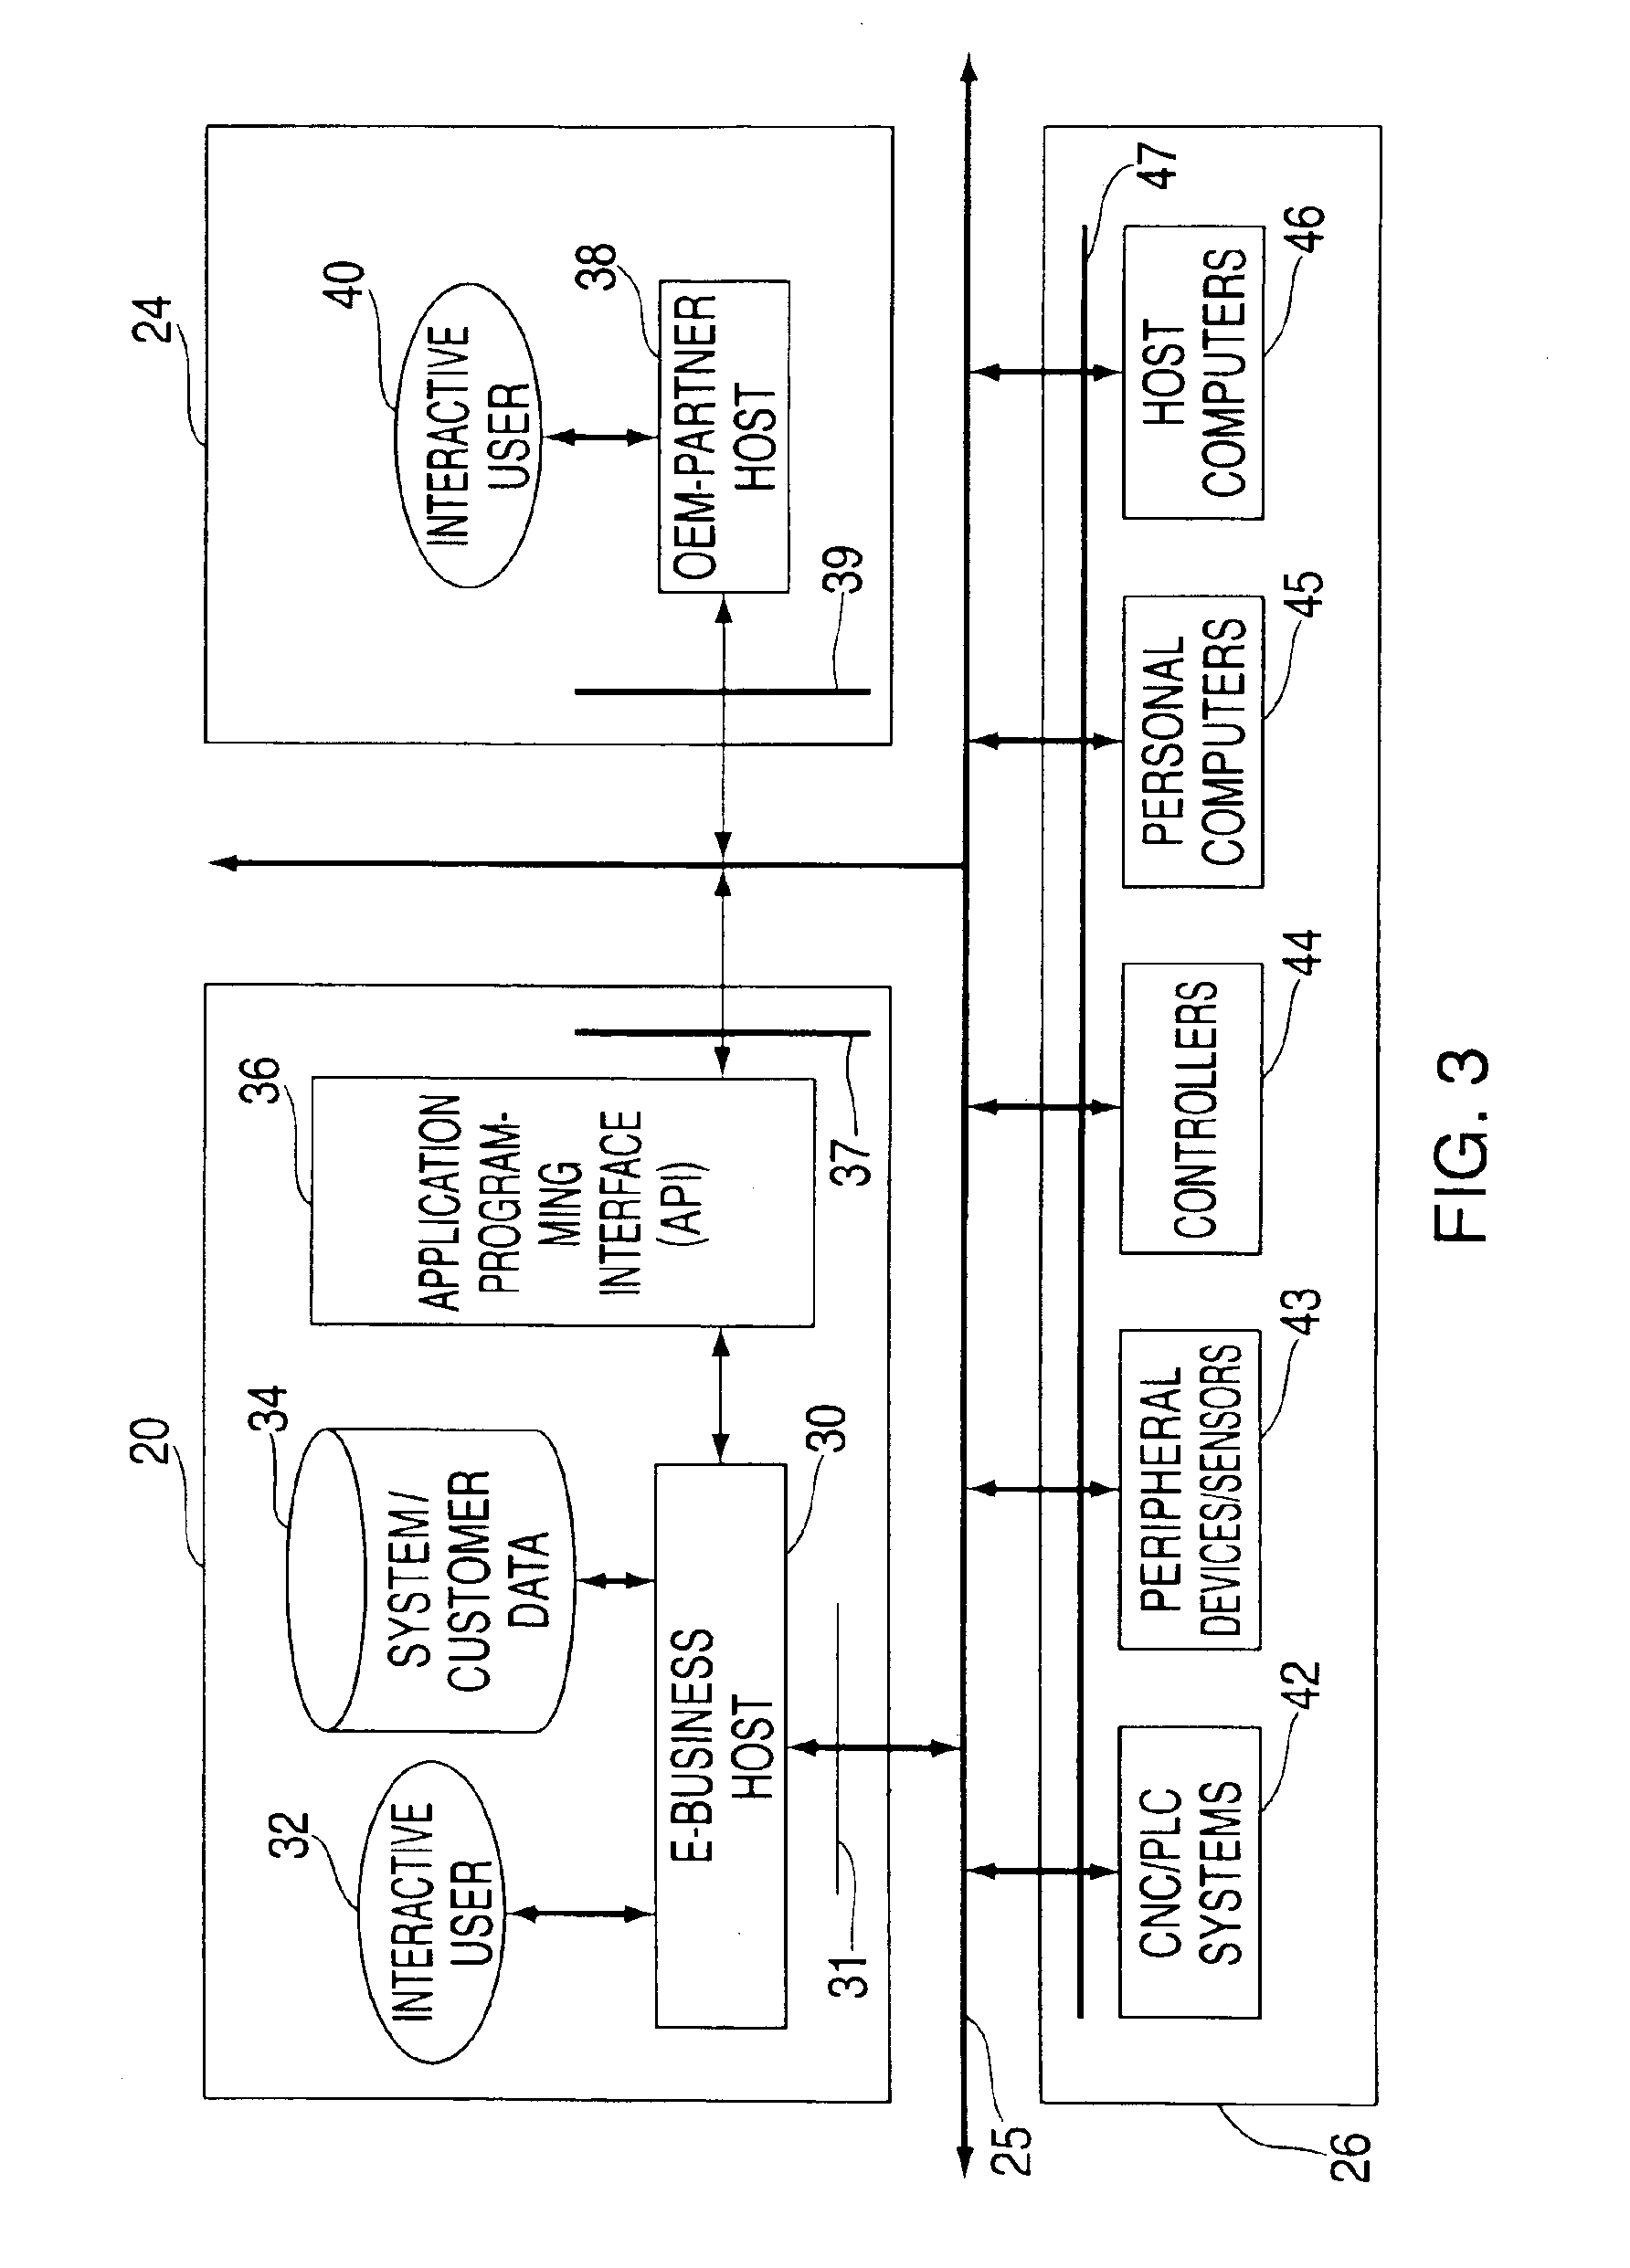 Database system and method for industrial automation services